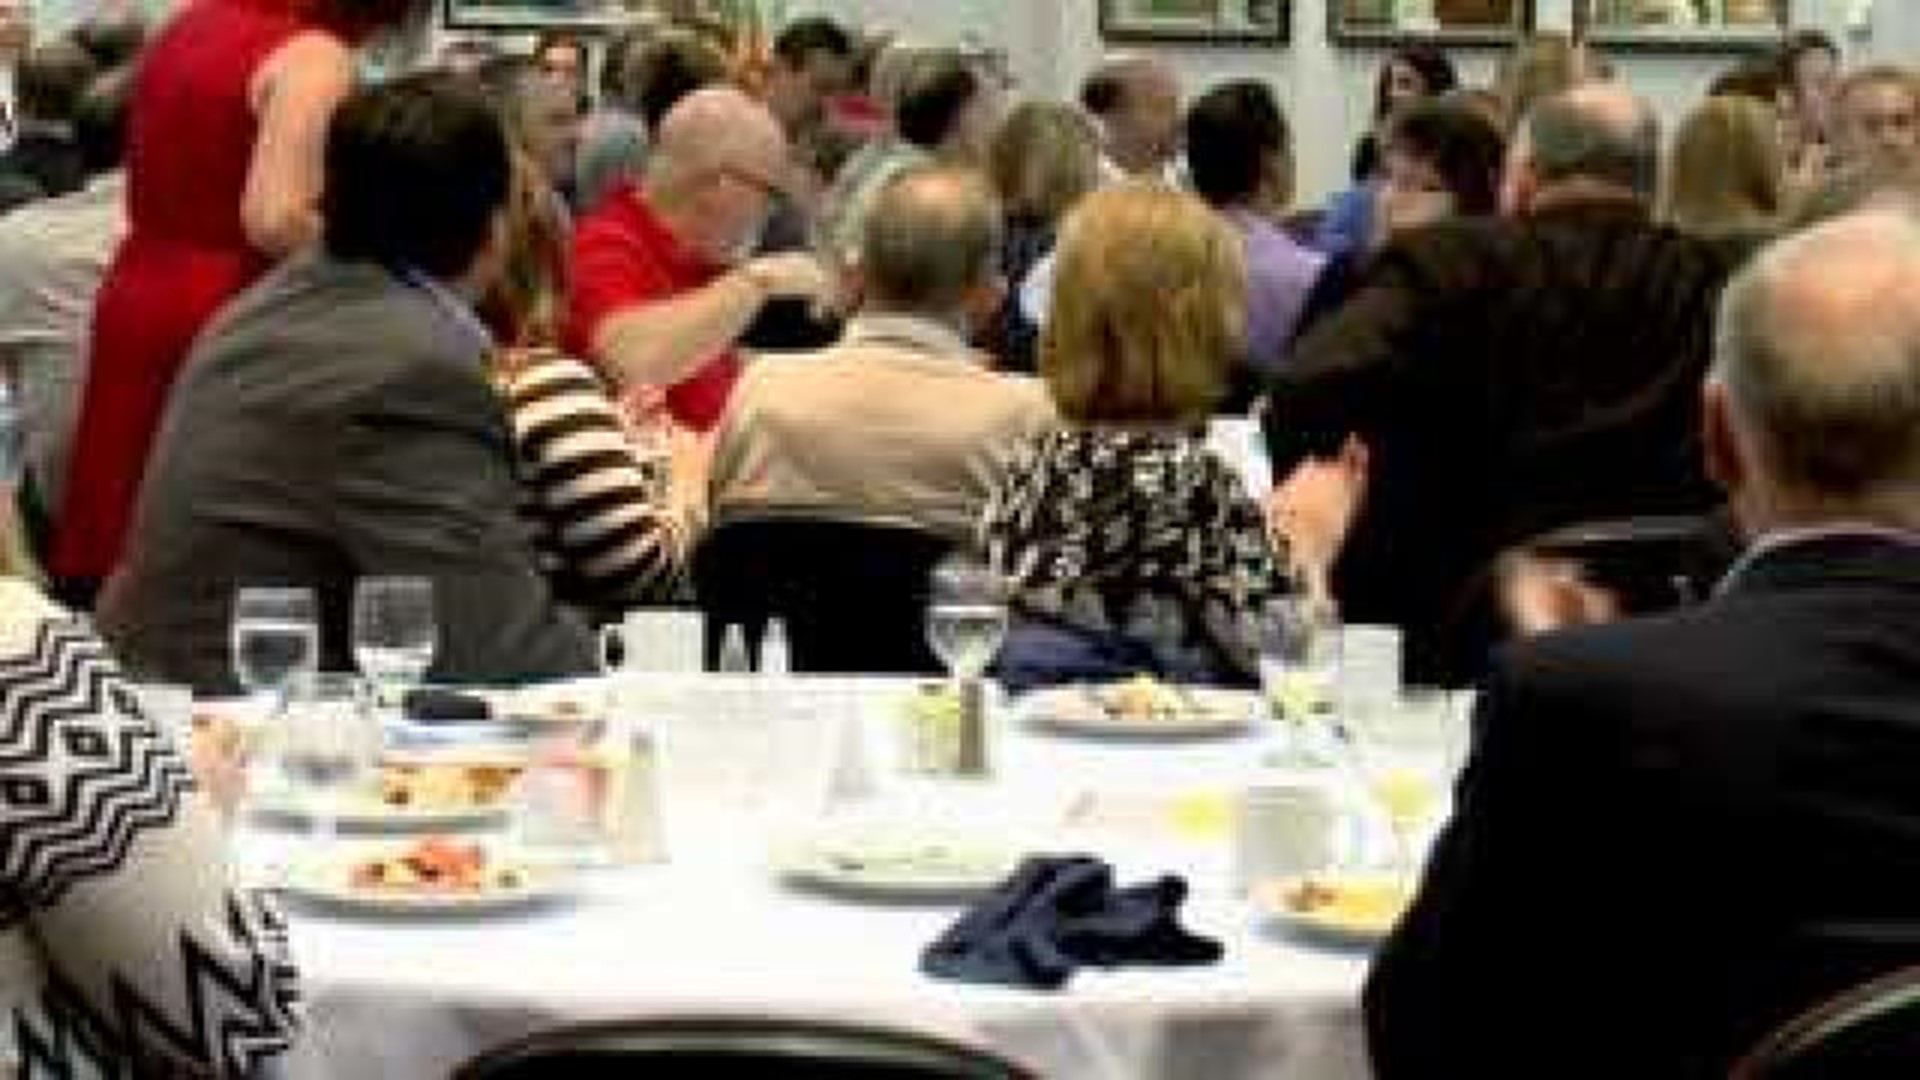 Governor Candidates Featured At First Friday Breakfast